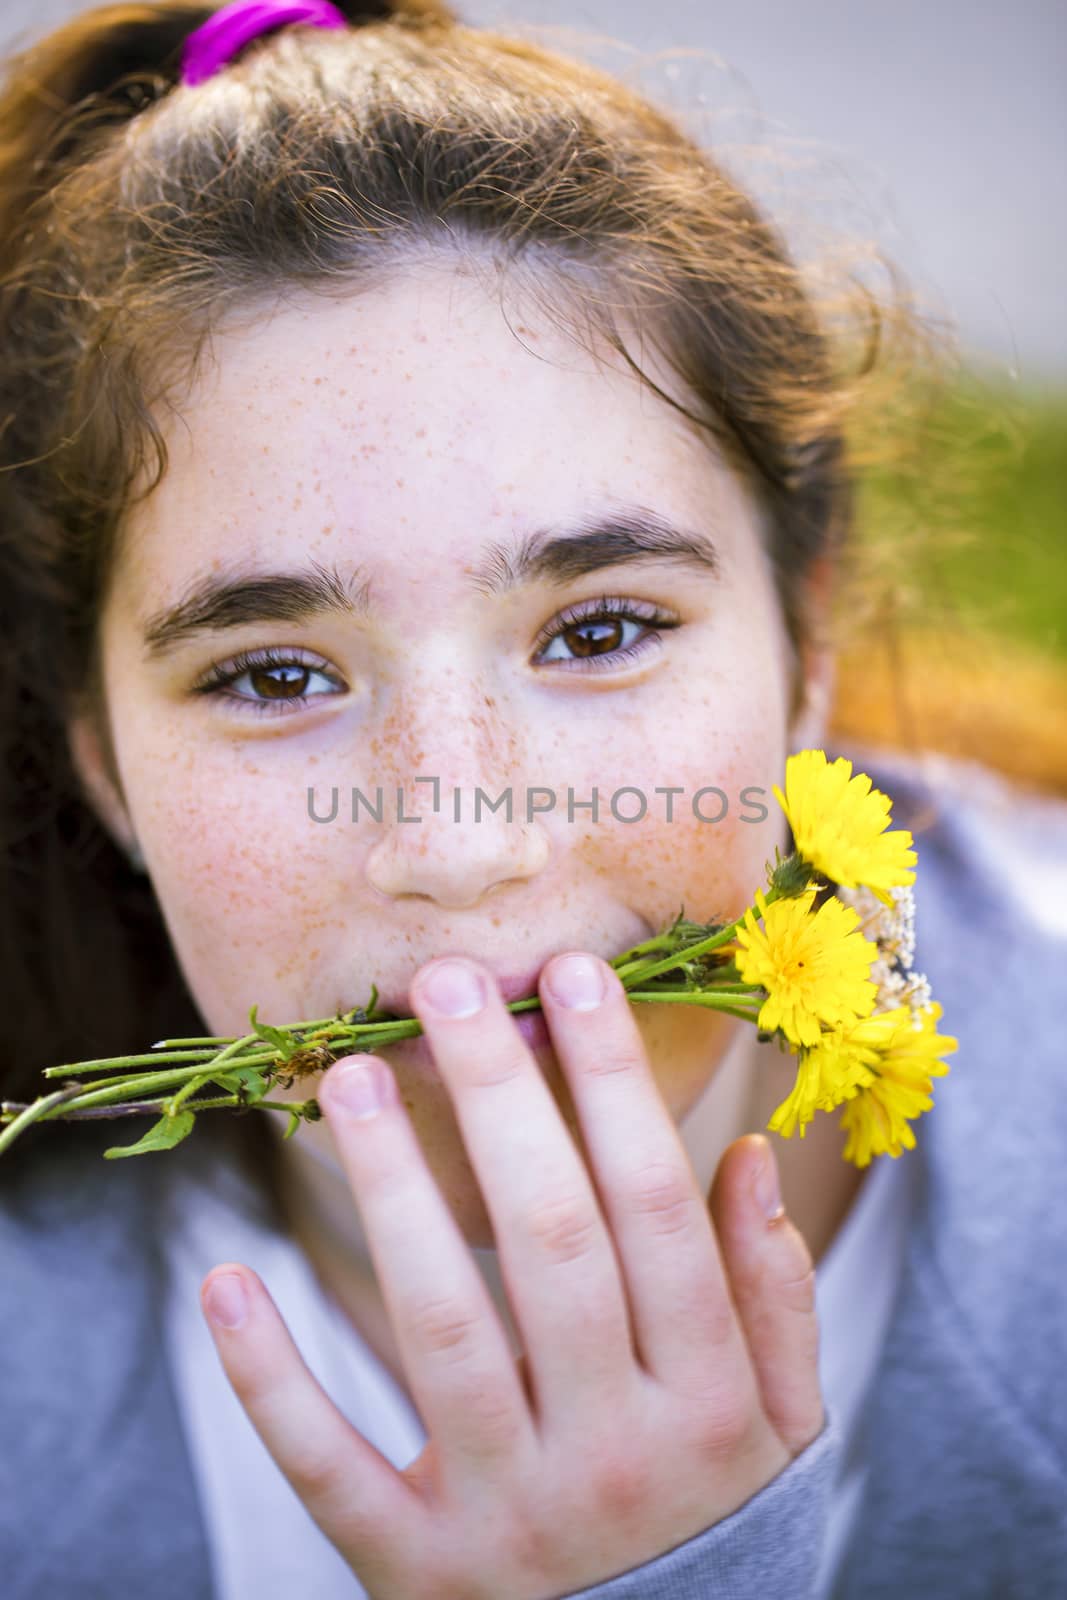 Close up portrait of a cheerful teen girl with long brown hair fooling around and holding yellow dandelions in her mouth. She is cute and funny.